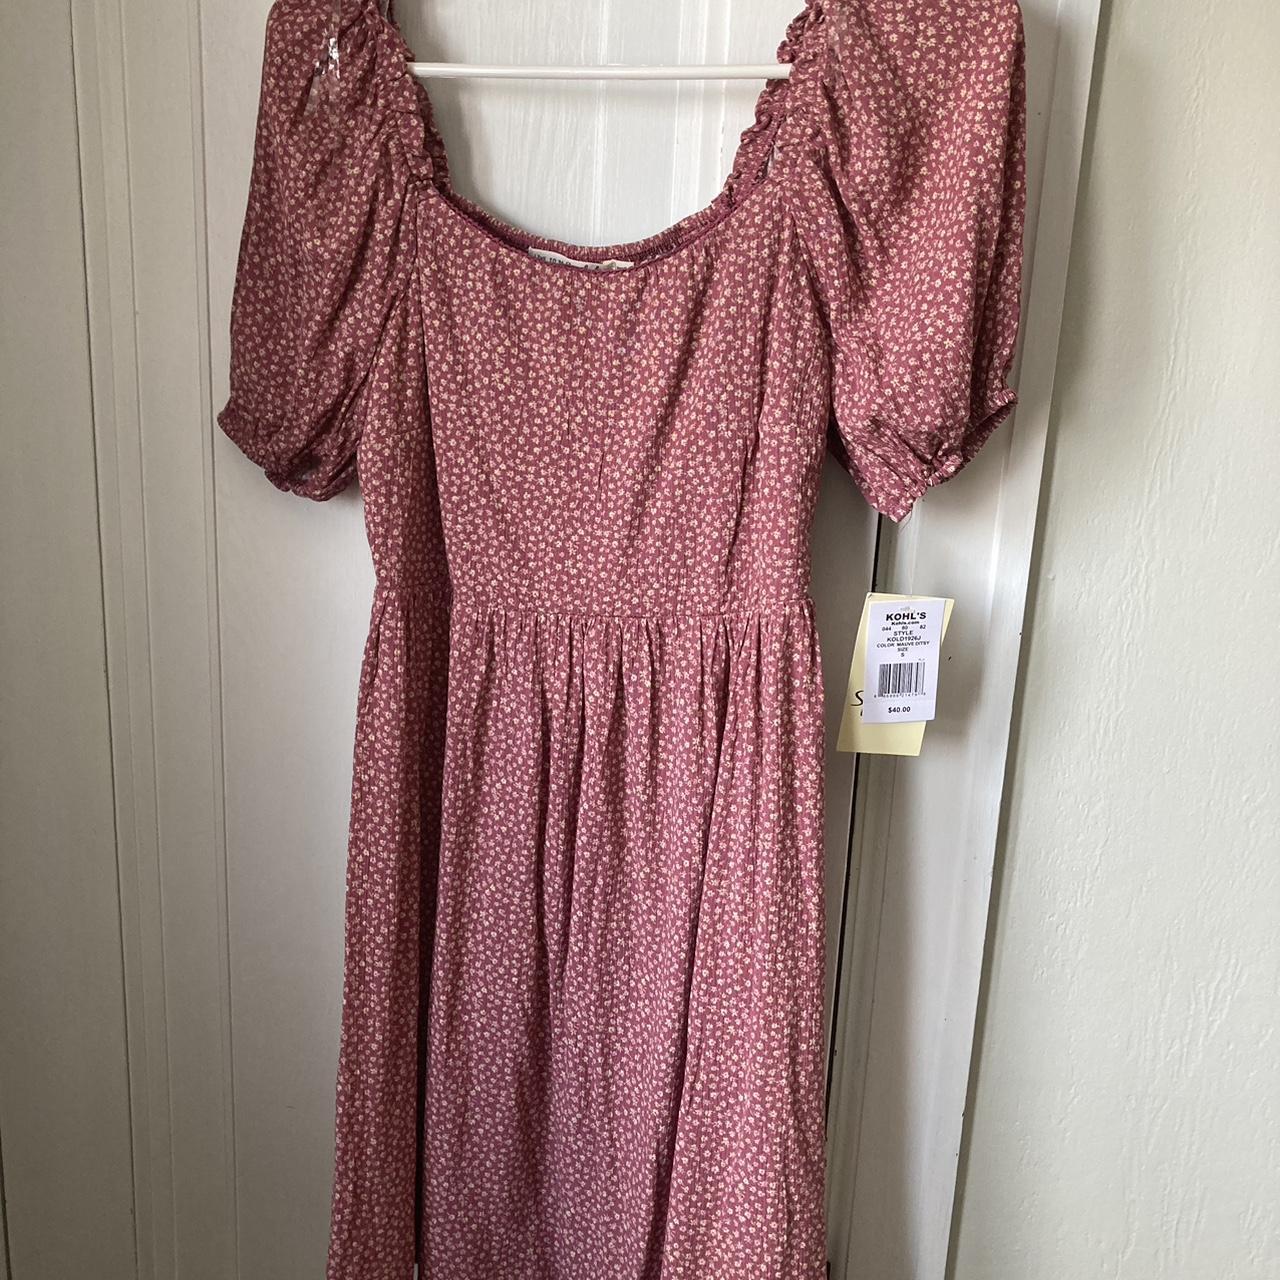 item listed by thriftingtay